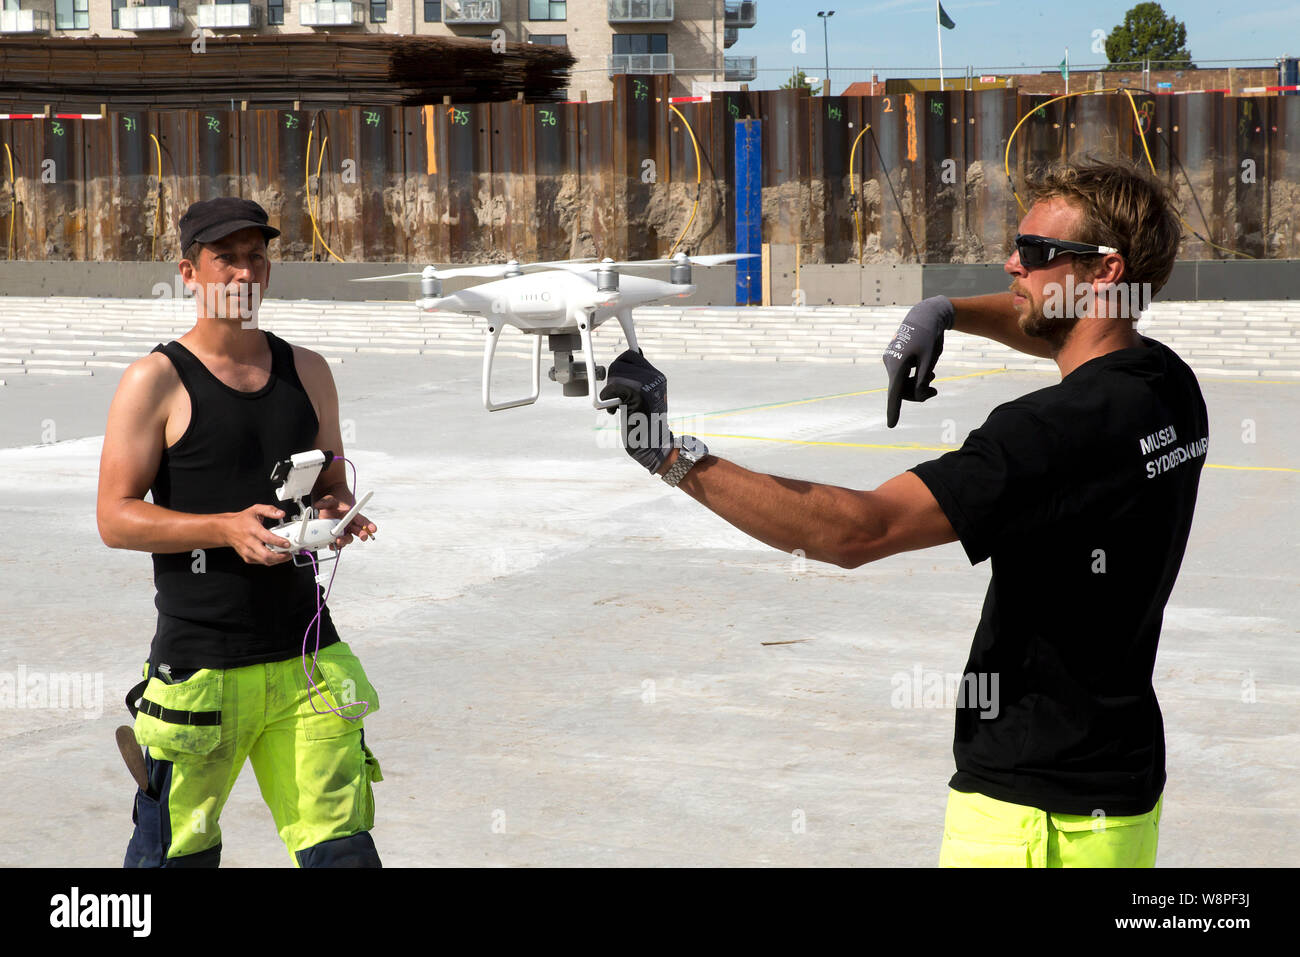 Archaeologist Jeppe Faerch-Jensen and colleague  Daniel Dalicsen, both from the Museum of South-East Denmark, prepare to fly a drone in order to photograph the large 500 years old ship wreck which just has been excavated at a building site near Koege, Denmark. (Photo by Ole Jensen/Alamy) Stock Photo